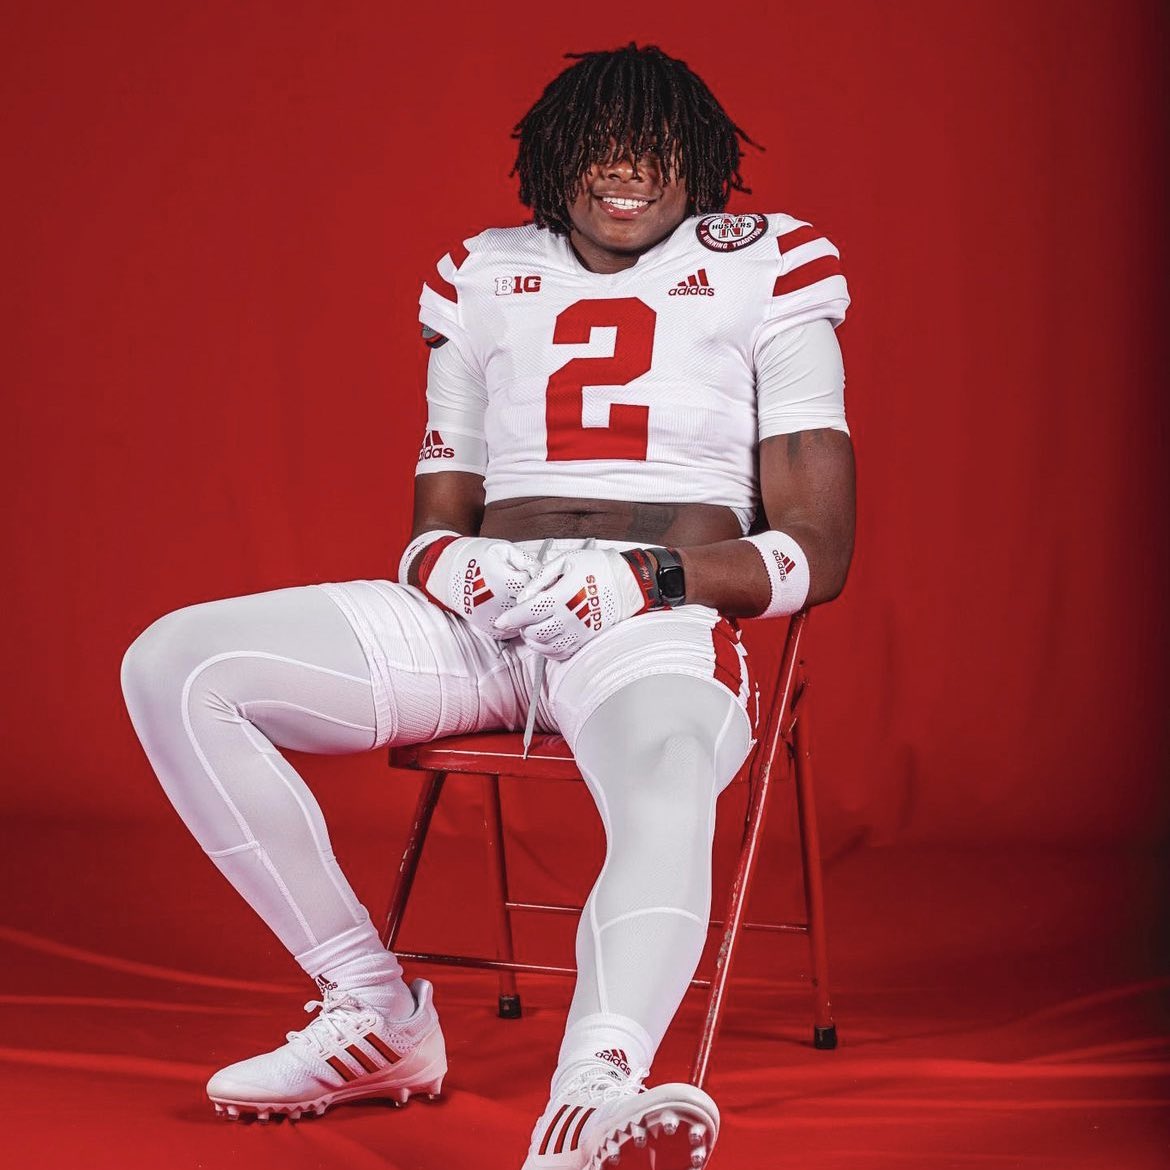 With Kewan Lacy’s pledge to Nebraska, the #Huskers now have two commits in a 10 mile radius in the Metroplex

With Mario Buford at Desoto and Lacy at Lancaster, you could see two future Huskers in the span of about 20 minutes